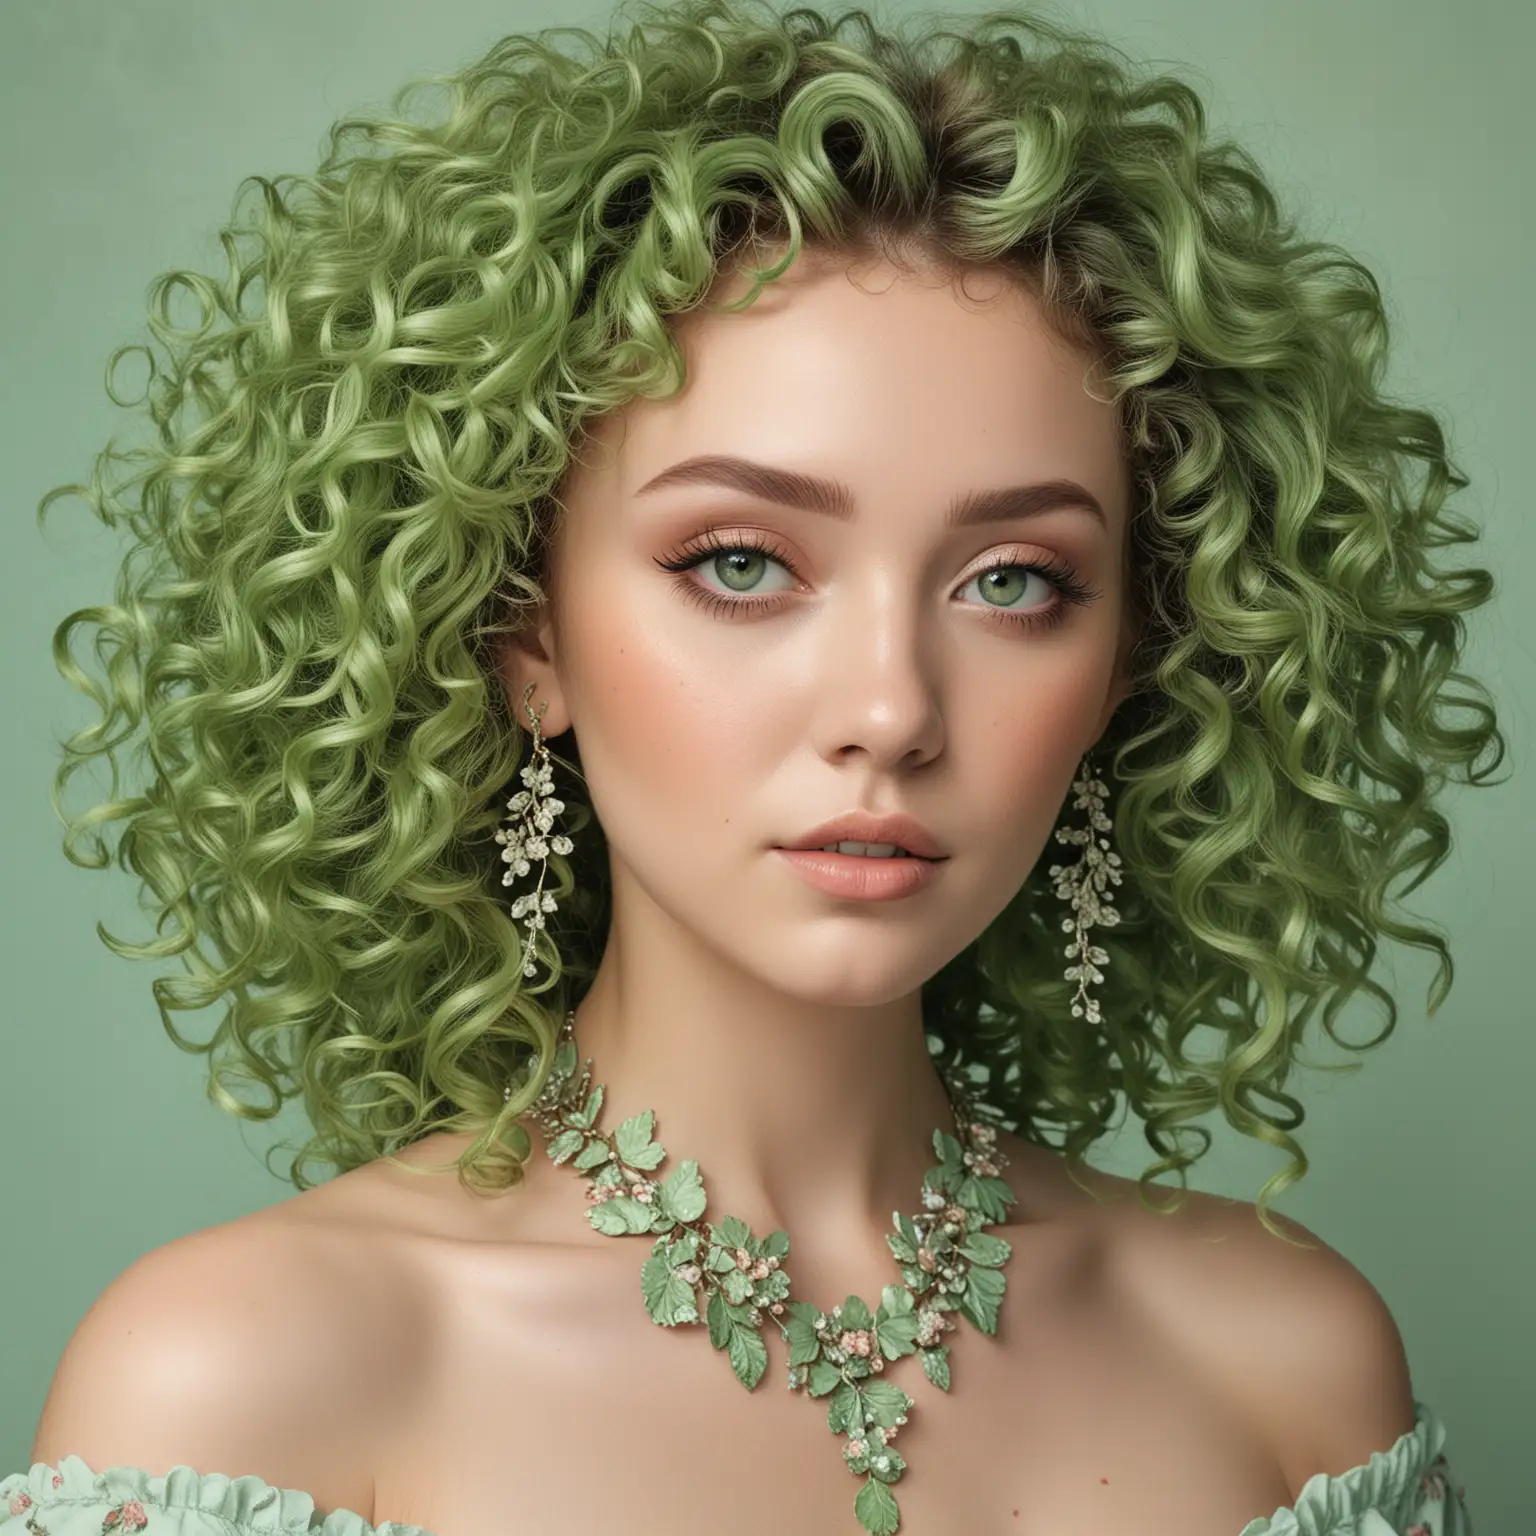 Portrait of a Woman with Pastel Green Curls and Floral Makeup